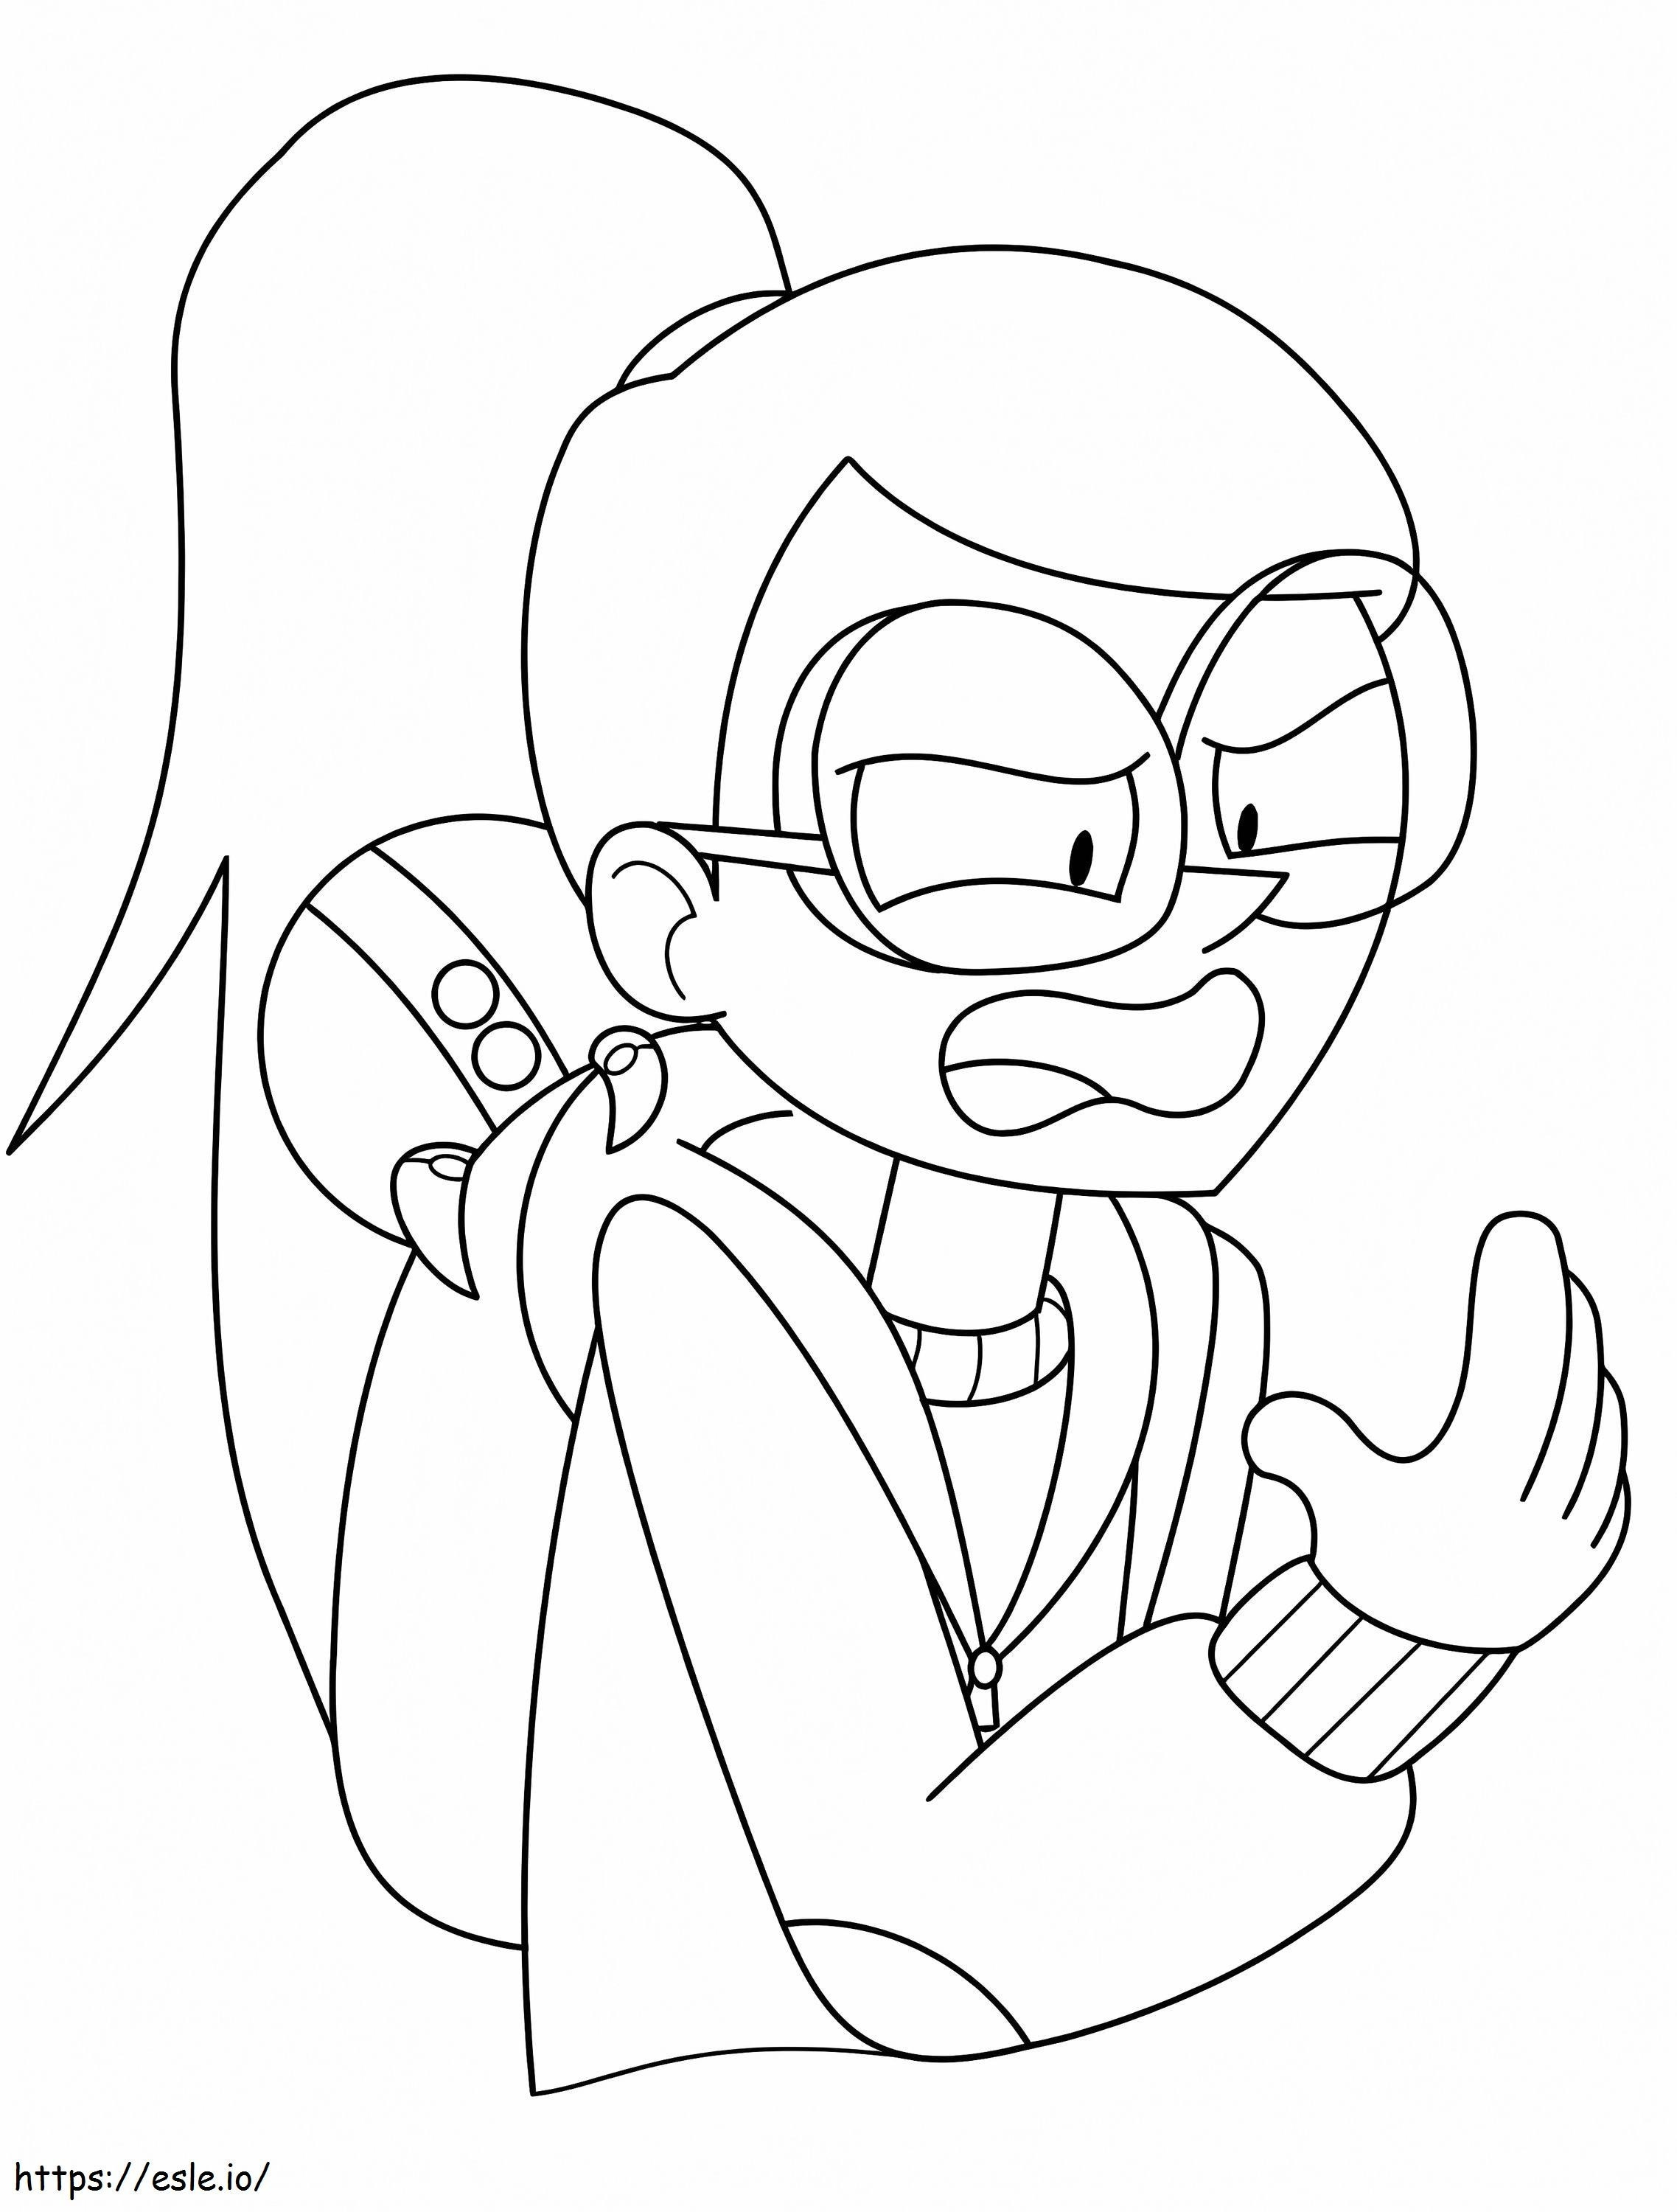 Tulip Olsen Infinity Train coloring page